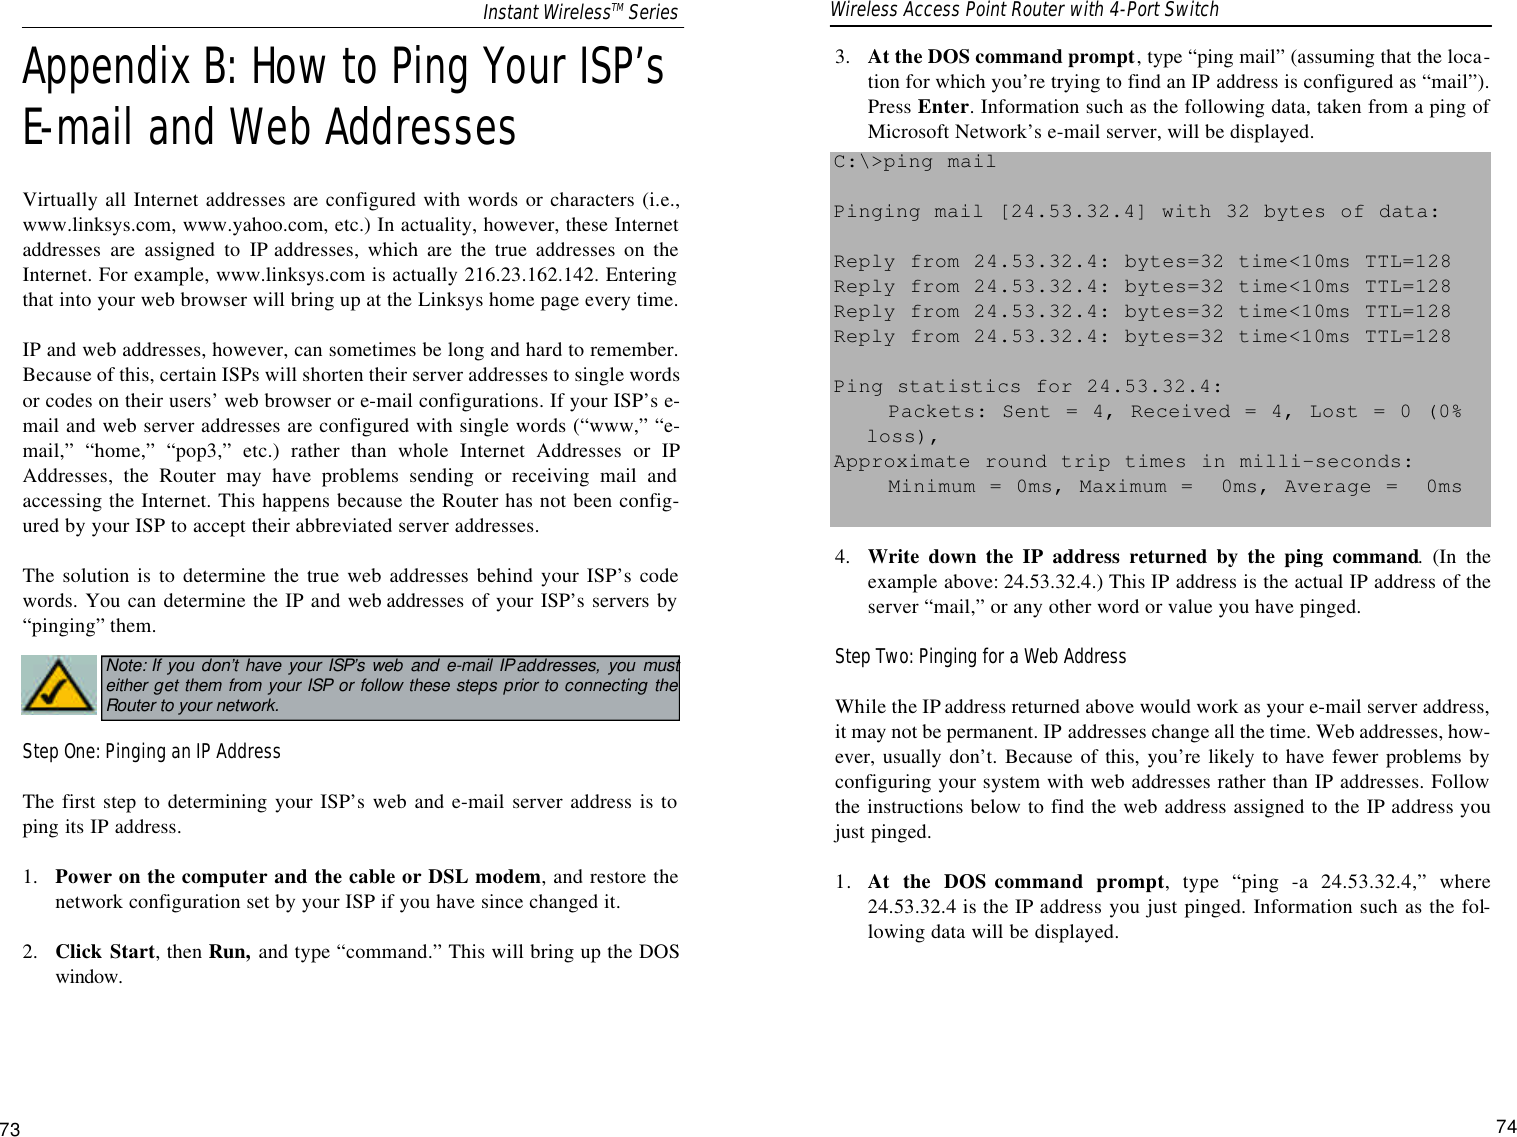 3.  At the DOS command prompt, type “ping mail” (assuming that the loca-tion for which you’re trying to find an IP address is configured as “mail”).Press Enter. Information such as the following data, taken from a ping ofMicrosoft Network’s e-mail server, will be displayed.4.  Write down the IP address returned by the ping command. (In theexample above: 24.53.32.4.) This IP address is the actual IP address of theserver “mail,” or any other word or value you have pinged.Step Two: Pinging for a Web AddressWhile the IP address returned above would work as your e-mail server address,it may not be permanent. IP addresses change all the time. Web addresses, how-ever, usually don’t. Because of this, you’re likely to have fewer problems byconfiguring your system with web addresses rather than IP addresses. Followthe instructions below to find the web address assigned to the IP address youjust pinged.1. At the DOS command prompt, type “ping -a 24.53.32.4,” where24.53.32.4 is the IP address you just pinged. Information such as the fol-lowing data will be displayed.C:\&gt;ping mailPinging mail [24.53.32.4] with 32 bytes of data:Reply from 24.53.32.4: bytes=32 time&lt;10ms TTL=128Reply from 24.53.32.4: bytes=32 time&lt;10ms TTL=128Reply from 24.53.32.4: bytes=32 time&lt;10ms TTL=128Reply from 24.53.32.4: bytes=32 time&lt;10ms TTL=128Ping statistics for 24.53.32.4:Packets: Sent = 4, Received = 4, Lost = 0 (0%loss),Approximate round trip times in milli-seconds:Minimum = 0ms, Maximum =  0ms, Average =  0ms74Appendix B: How to Ping Your ISP’sE-mail and Web AddressesVirtually all Internet addresses are configured with words or characters (i.e.,www.linksys.com, www.yahoo.com, etc.) In actuality, however, these Internetaddresses are assigned to IP addresses, which are the true addresses on theInternet. For example, www.linksys.com is actually 216.23.162.142. Enteringthat into your web browser will bring up at the Linksys home page every time.IP and web addresses, however, can sometimes be long and hard to remember.Because of this, certain ISPs will shorten their server addresses to single wordsor codes on their users’ web browser or e-mail configurations. If your ISP’s e-mail and web server addresses are configured with single words (“www,” “e-mail,” “home,” “pop3,” etc.) rather than whole Internet Addresses or IPAddresses, the Router may have problems sending or receiving mail andaccessing the Internet. This happens because the Router has not been config-ured by your ISP to accept their abbreviated server addresses.The solution is to determine the true web addresses behind your ISP’s codewords. You can determine the IP and web addresses of your ISP’s servers by“pinging” them.Step One: Pinging an IP AddressThe first step to determining your ISP’s web and e-mail server address is toping its IP address.1.  Power on the computer and the cable or DSL modem, and restore thenetwork configuration set by your ISP if you have since changed it.2.  Click Start, then Run, and type “command.” This will bring up the DOSwindow.73Note: If you don’t have your ISP’s web and e-mail IP addresses, you musteither get them from your ISP or follow these steps prior to connecting theRouter to your network.Instant WirelessTM Series Wireless Access Point Router with 4-Port Switch